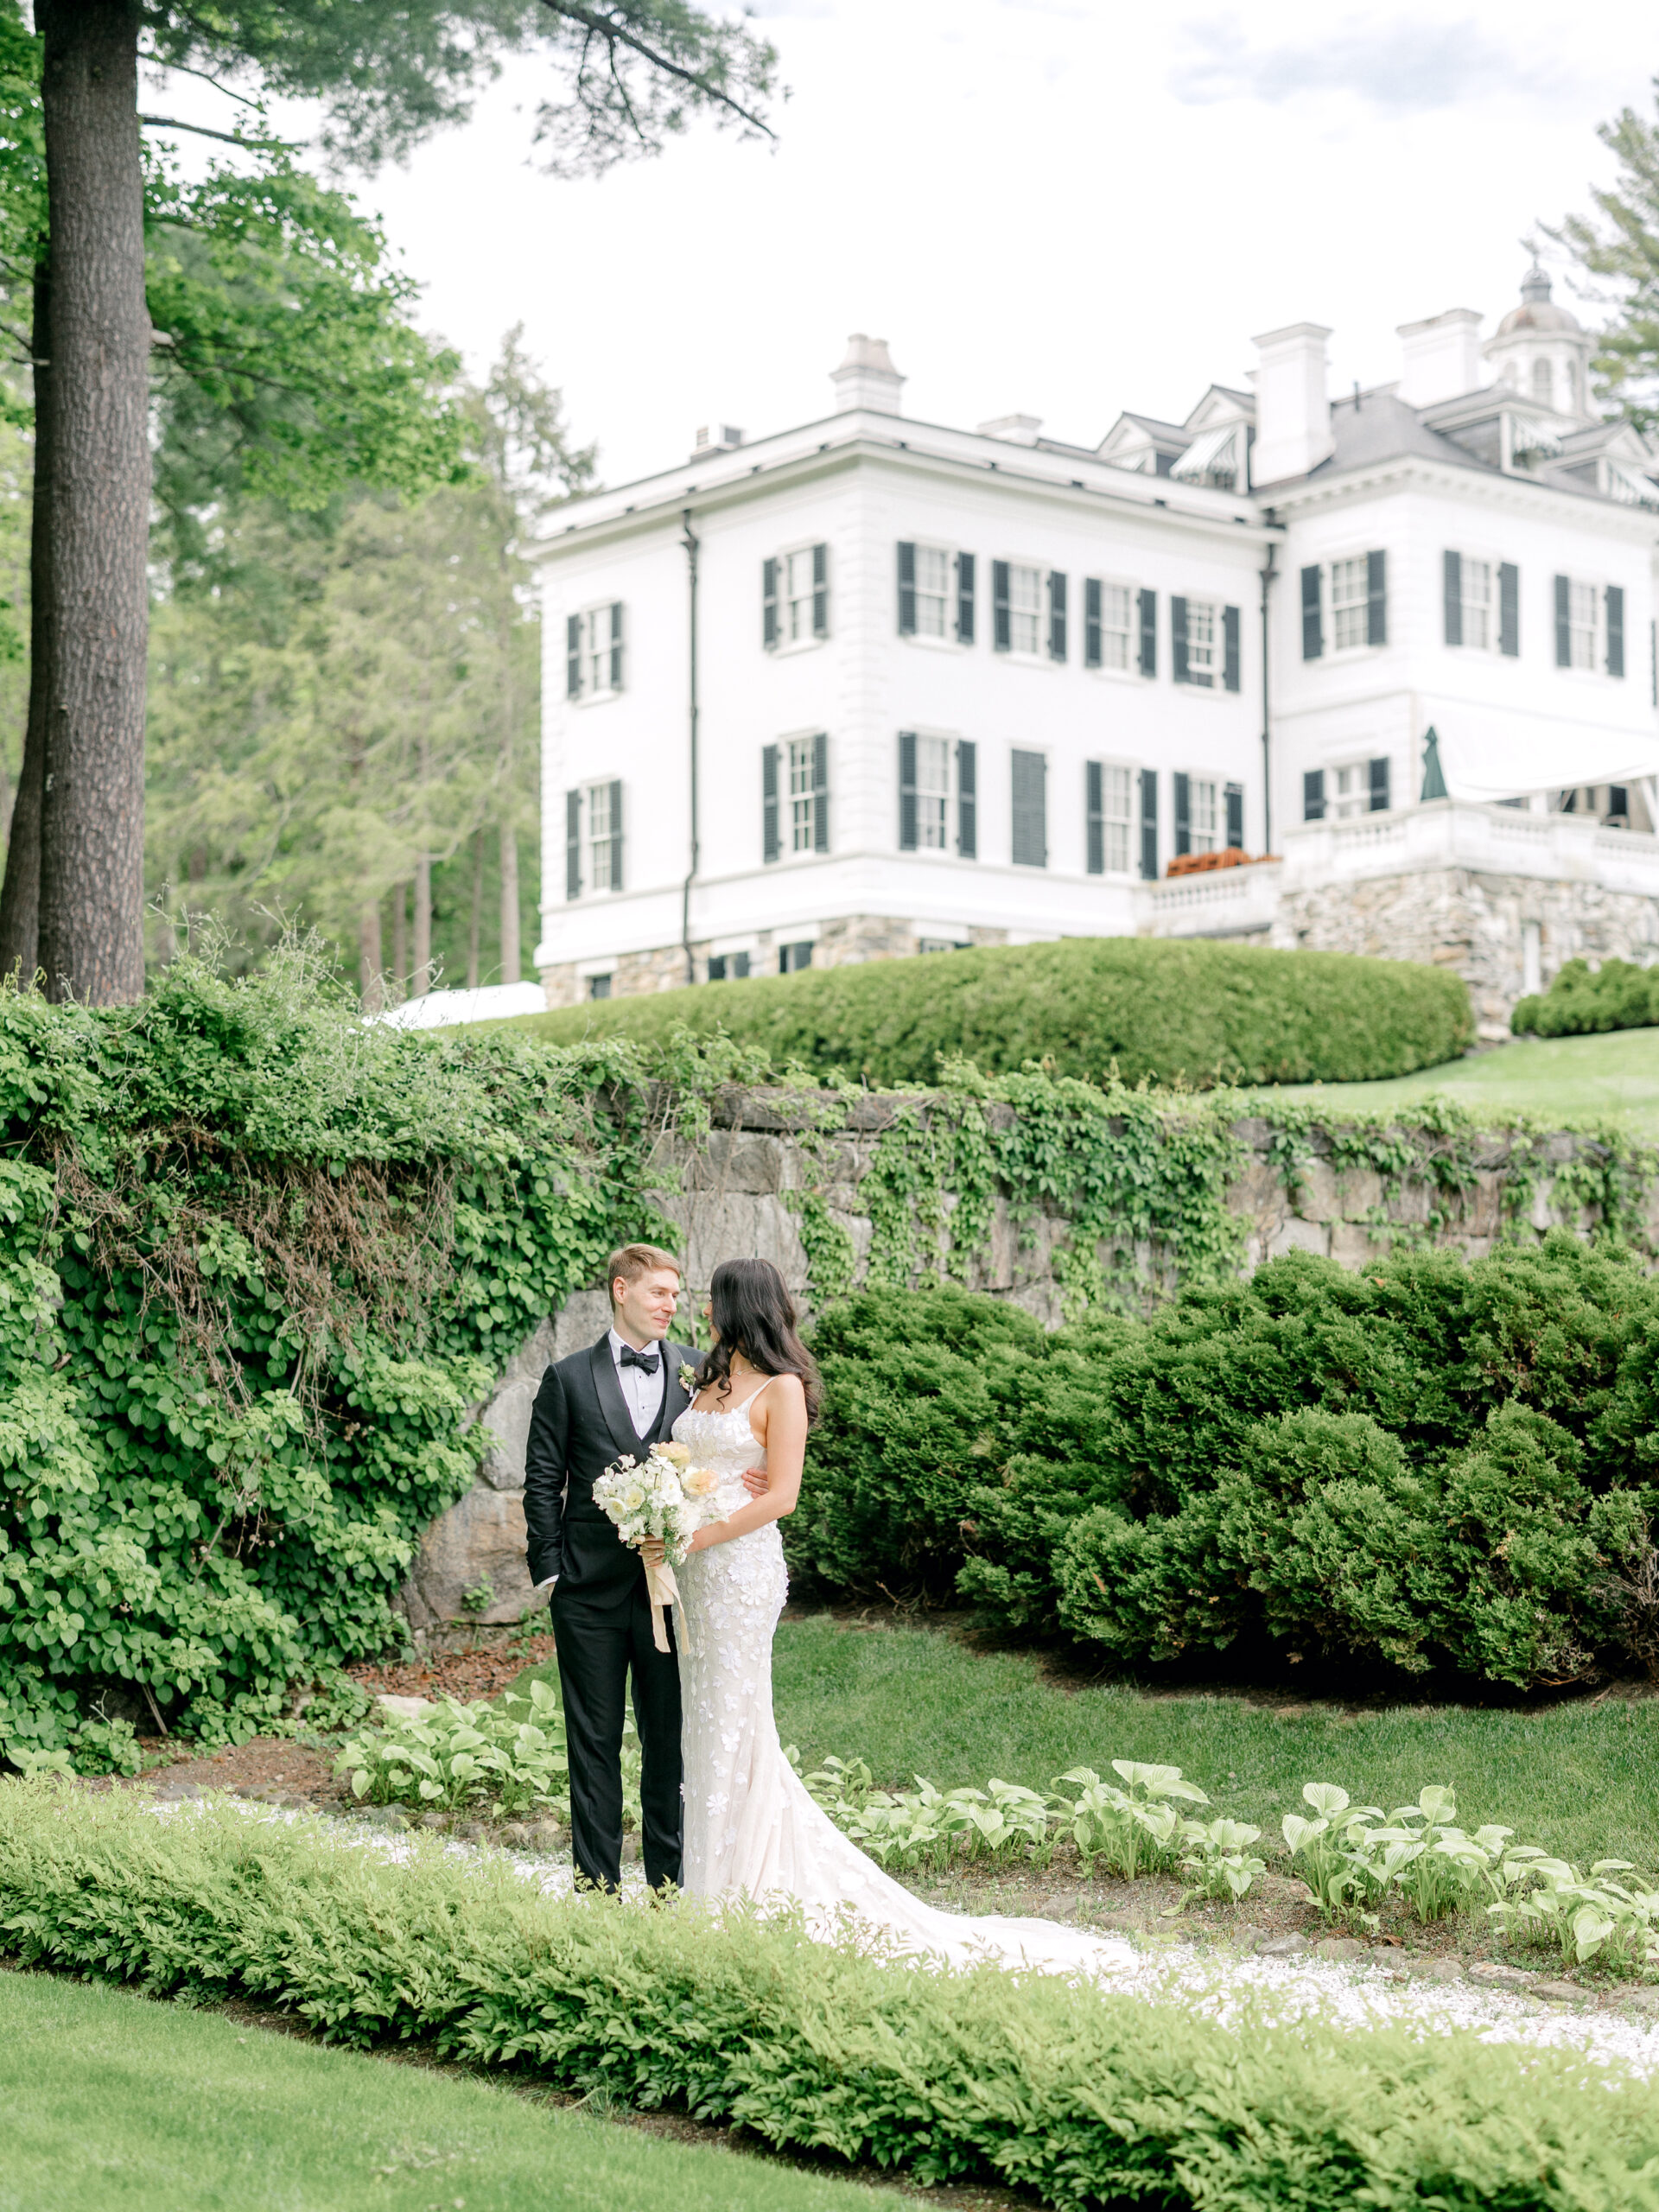 Bride and groom in the Italian Garden with The Mount wedding venue in the background